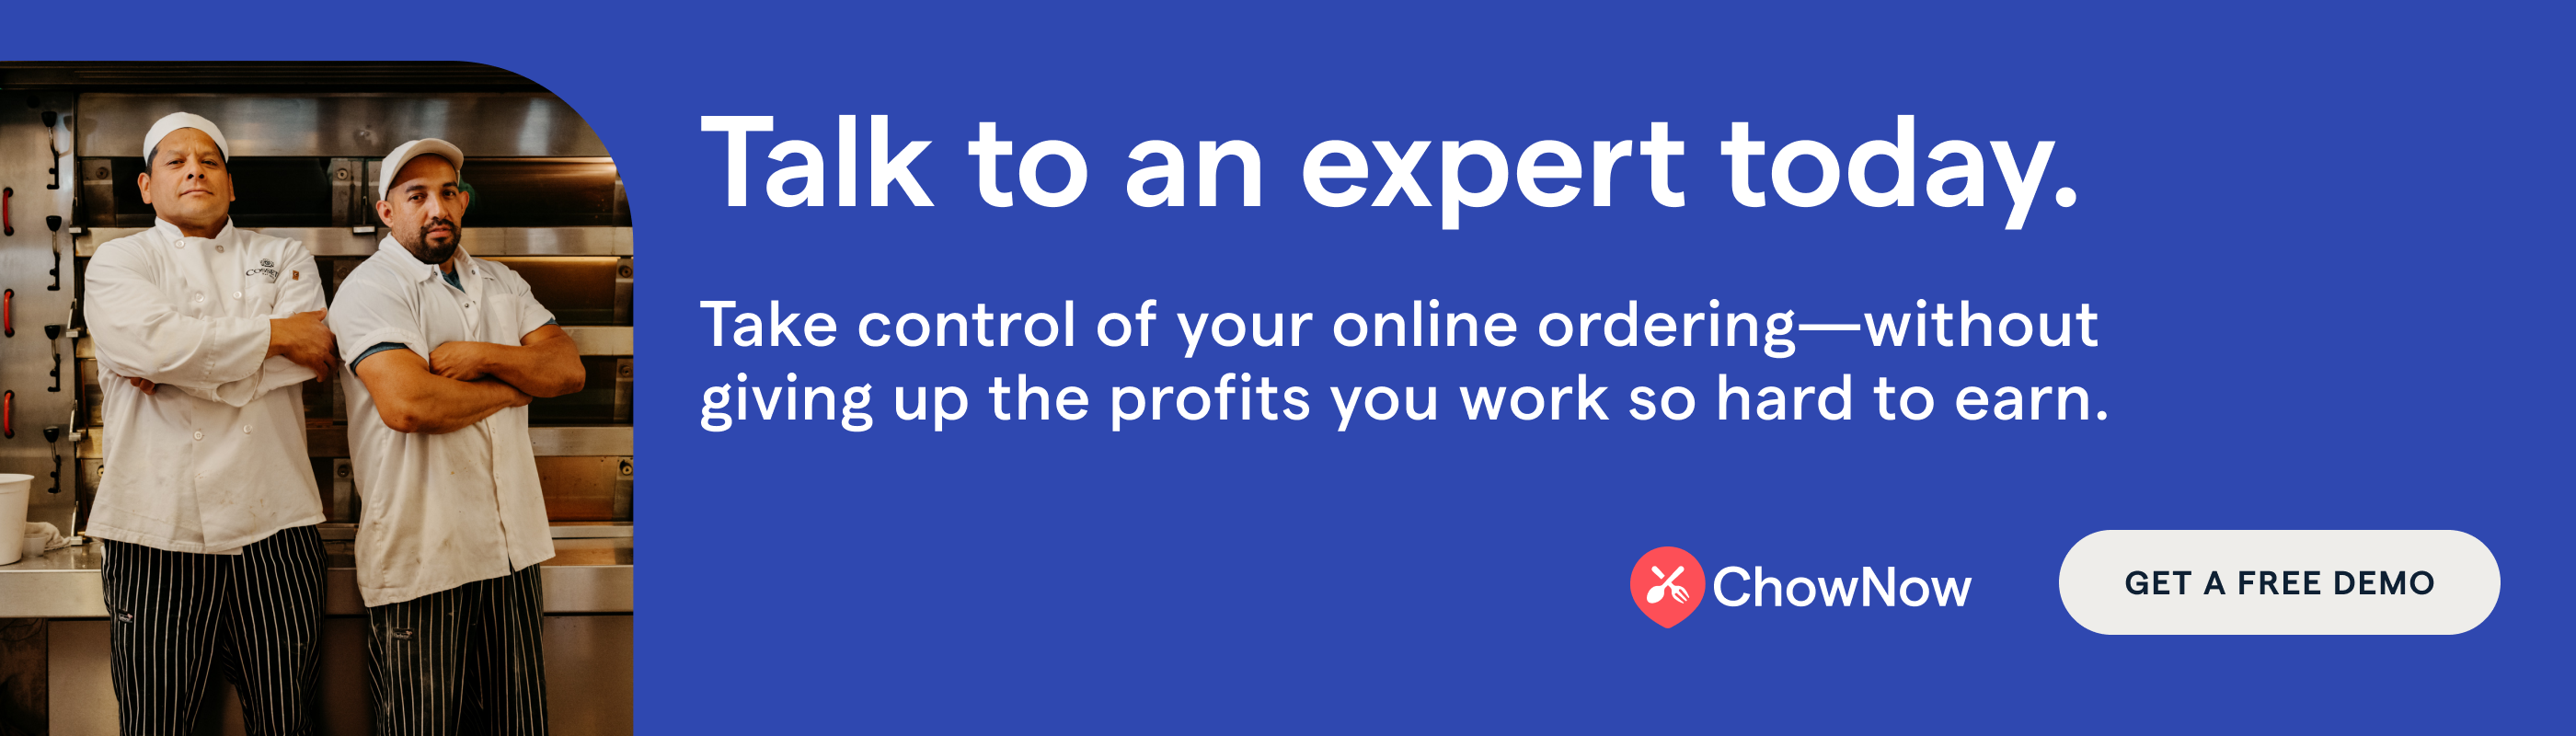 Take control of your online ordering--without giving up the profits you work so hard to earn. Talk to an expert today